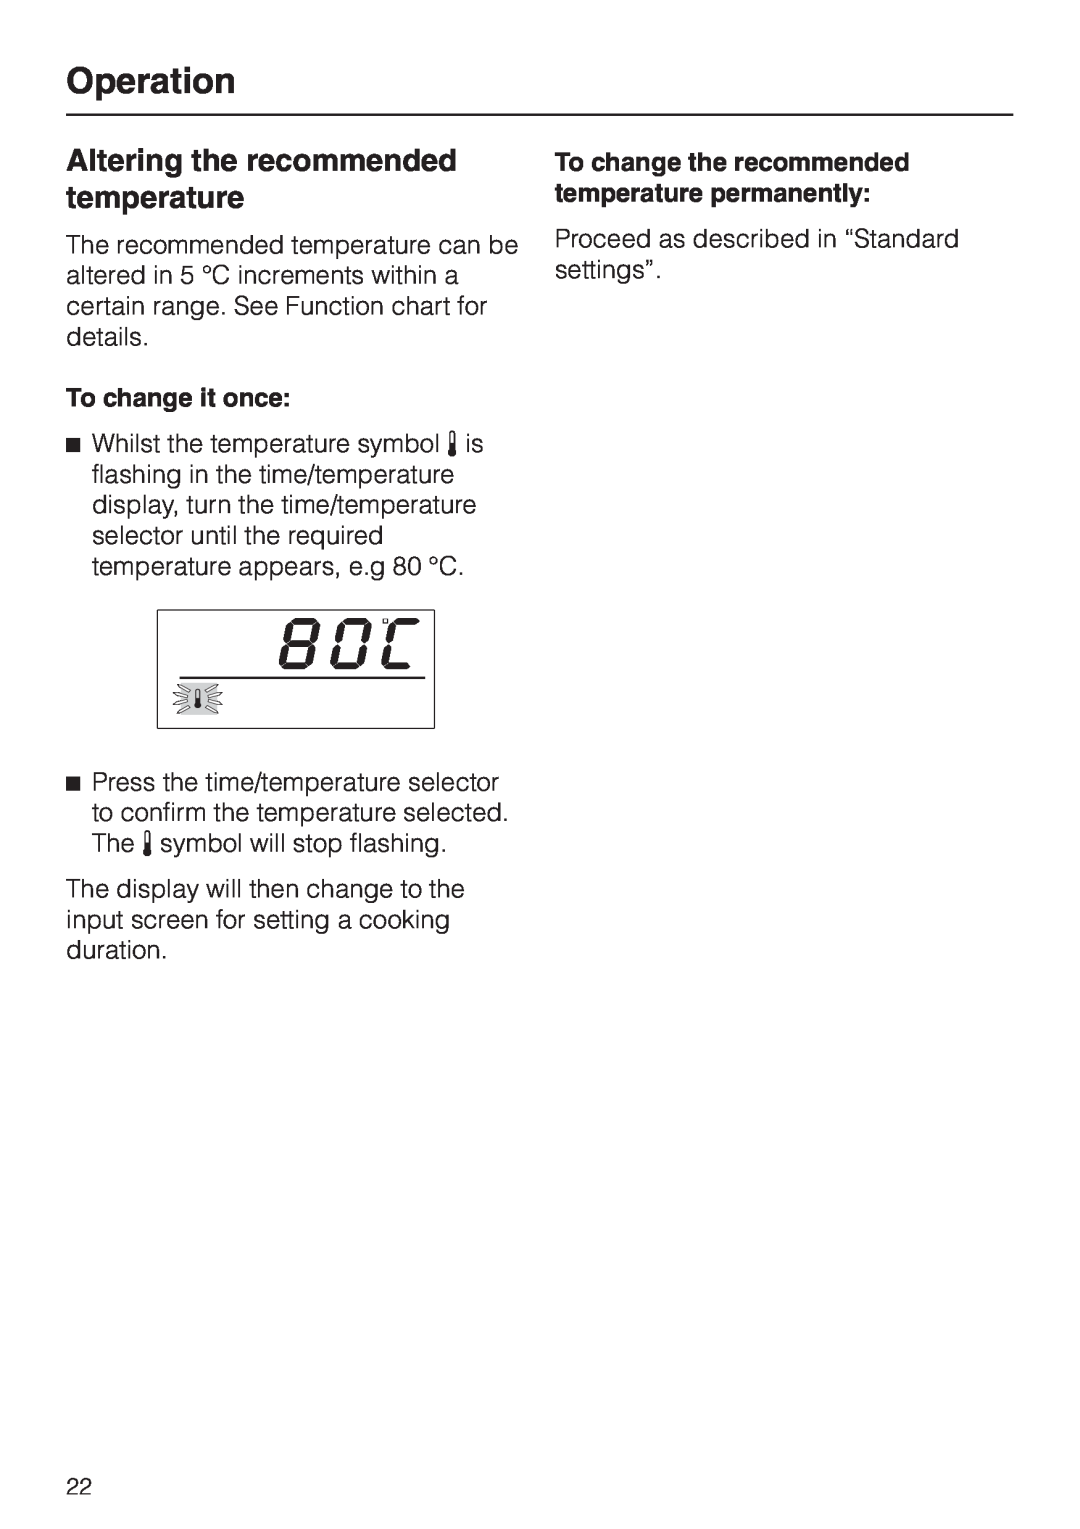 Miele DG 2551 Altering the recommended temperature, To change it once, To change the recommended temperature permanently 